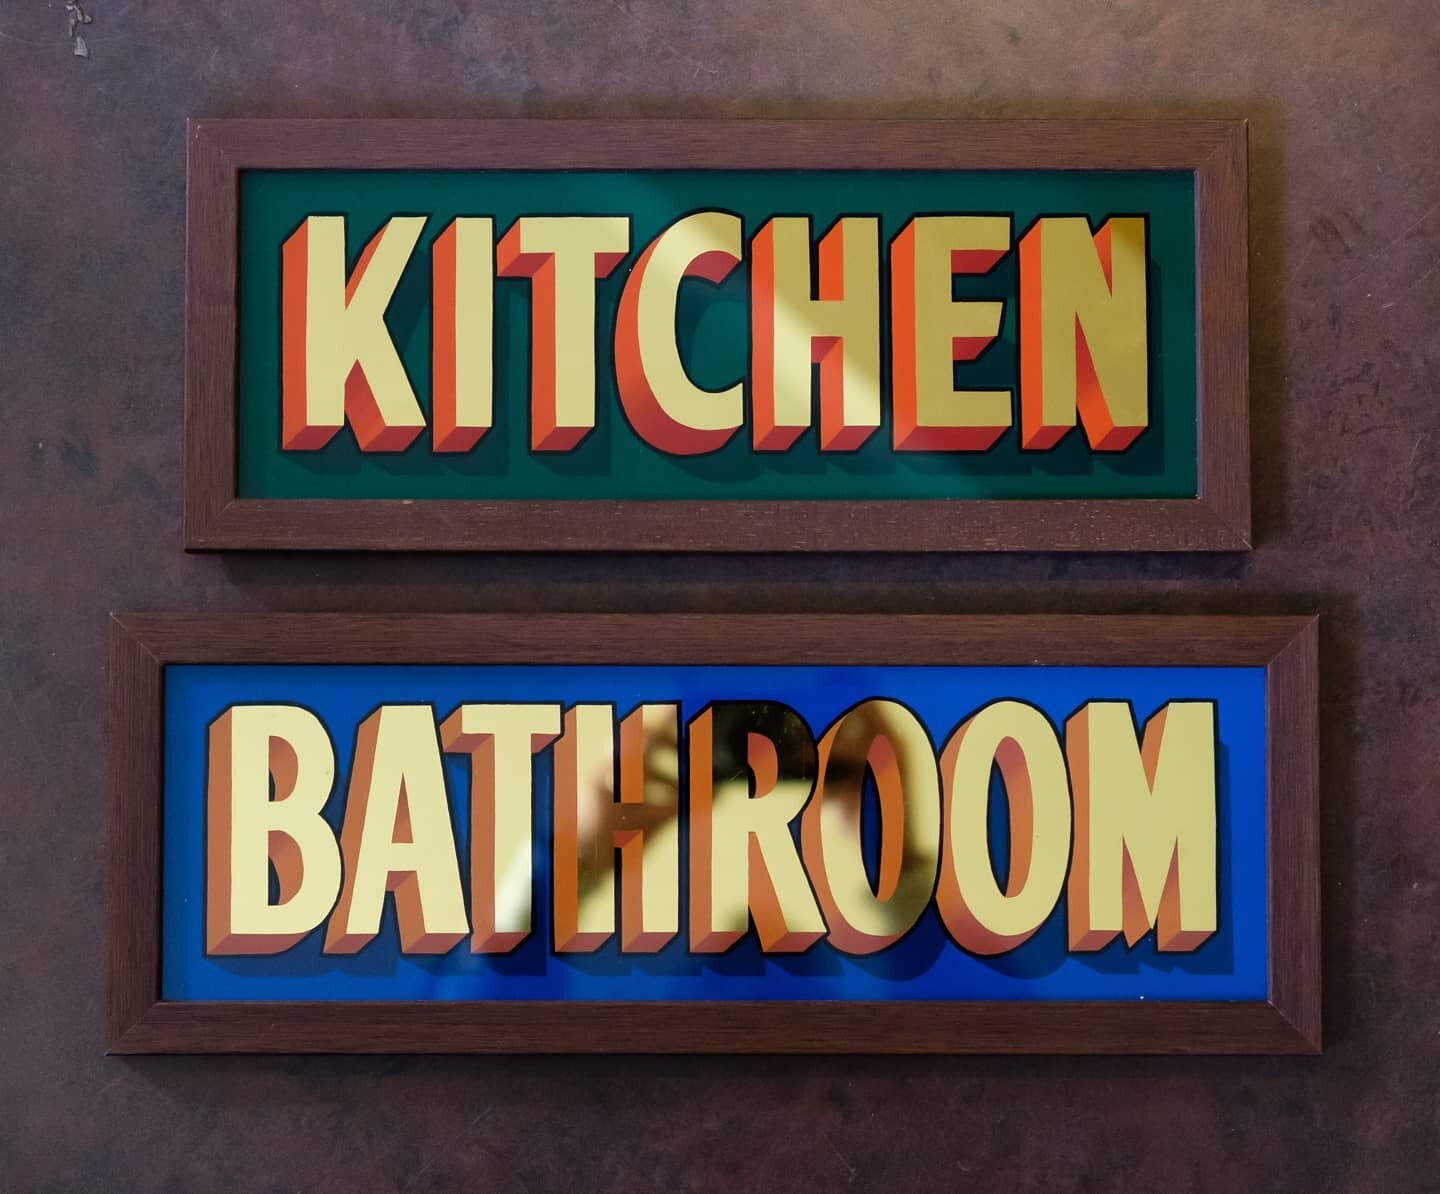 Mini kitchen and bathroom signs now available to order (see website for info)

#kicthen #bathroom #artforthehome #kitchenart #bathroomart #signpainting #alwayshandpaint #goldleaf #gold #gilding